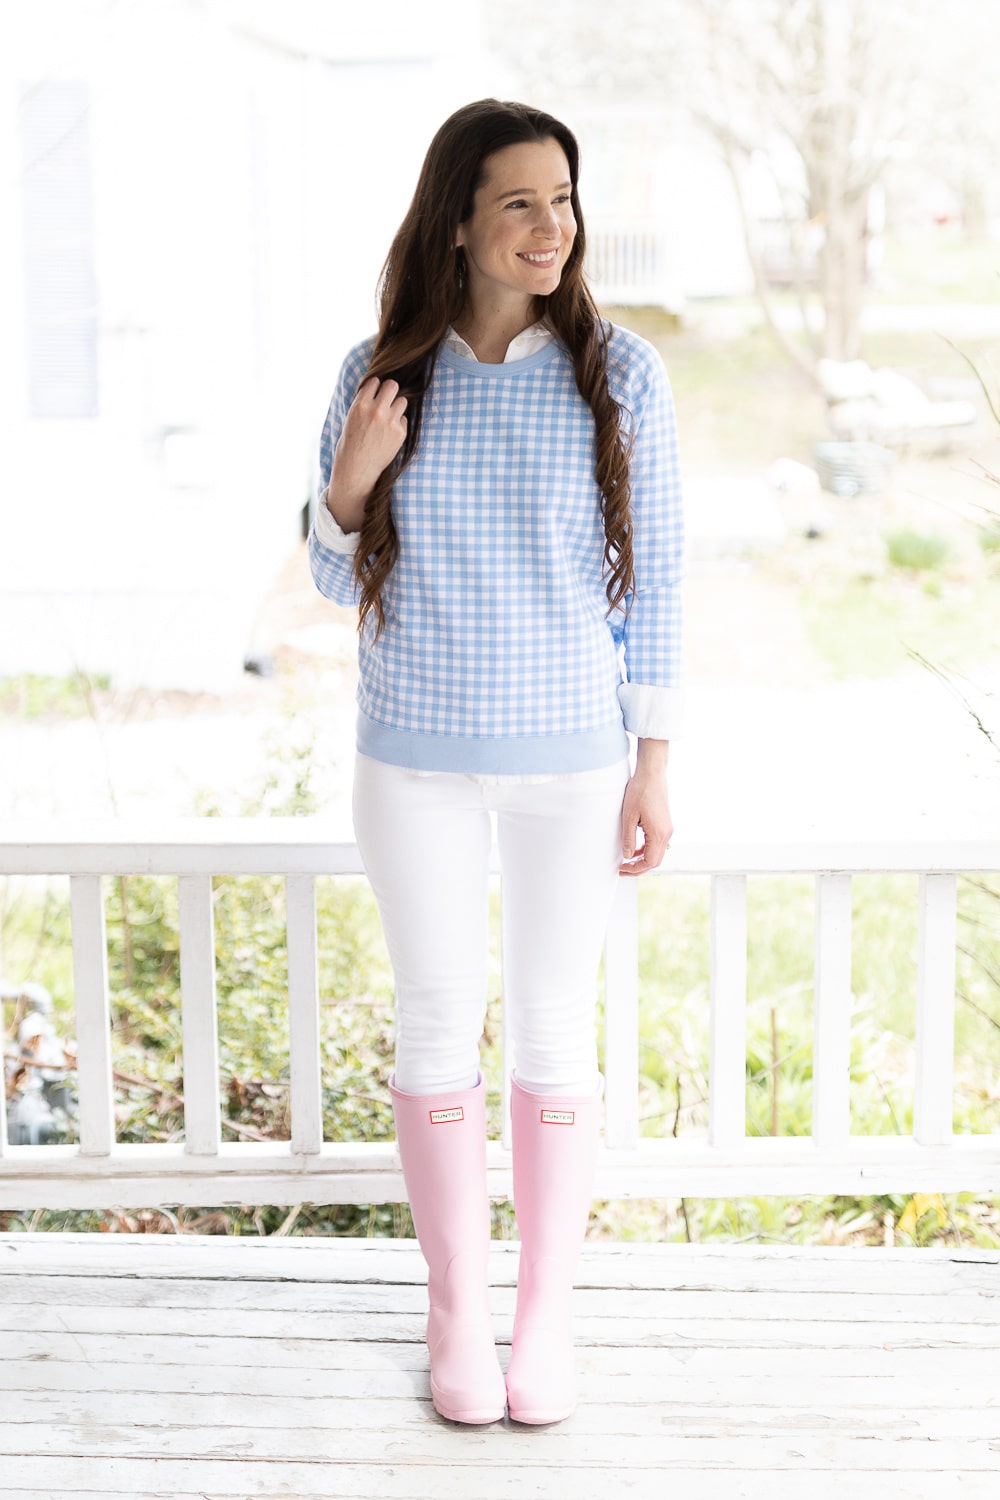 Pink rain boots outfit styled by preppy fashion blogger Stephanie Ziajka on Diary of a Debutante